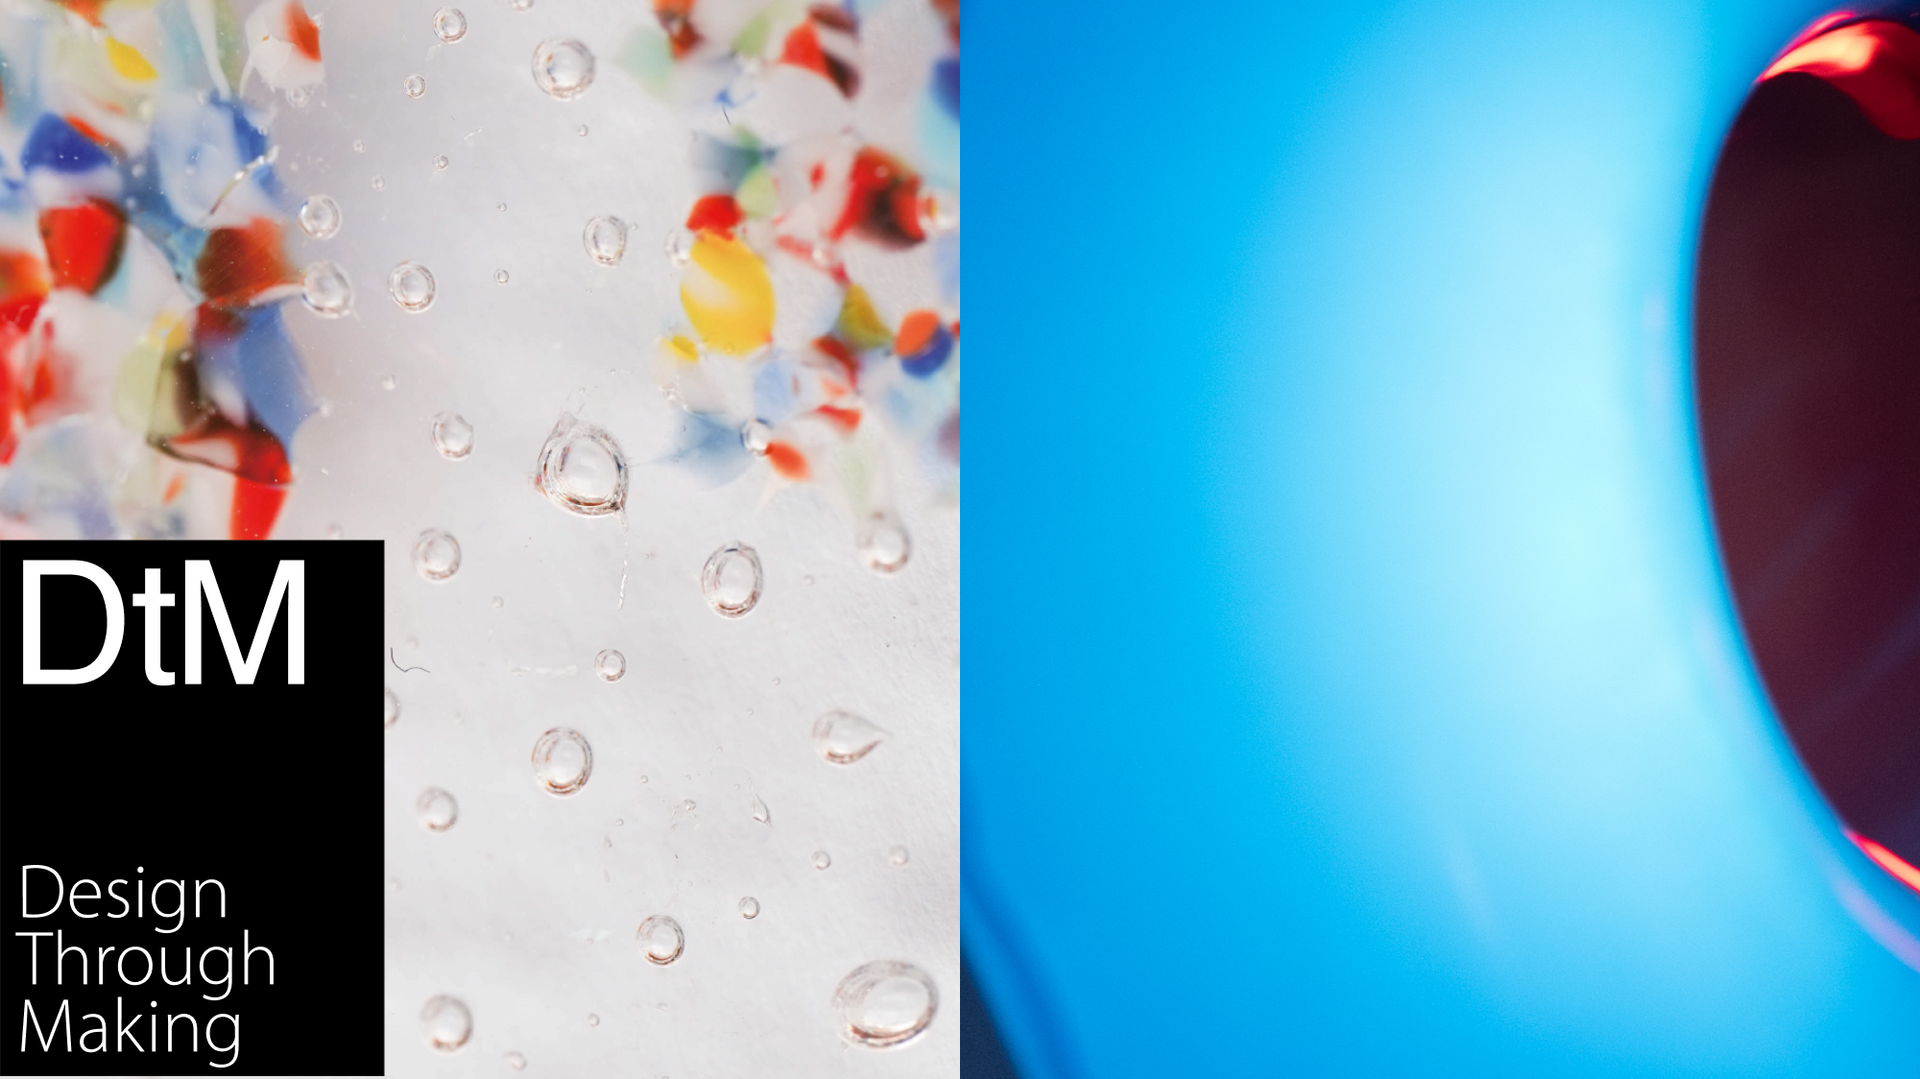 Two images side by side: one of water droplets on colourful glass, another of an out-of-focus red mark on blue background, black 'DtM Design Through Making' textbox on left